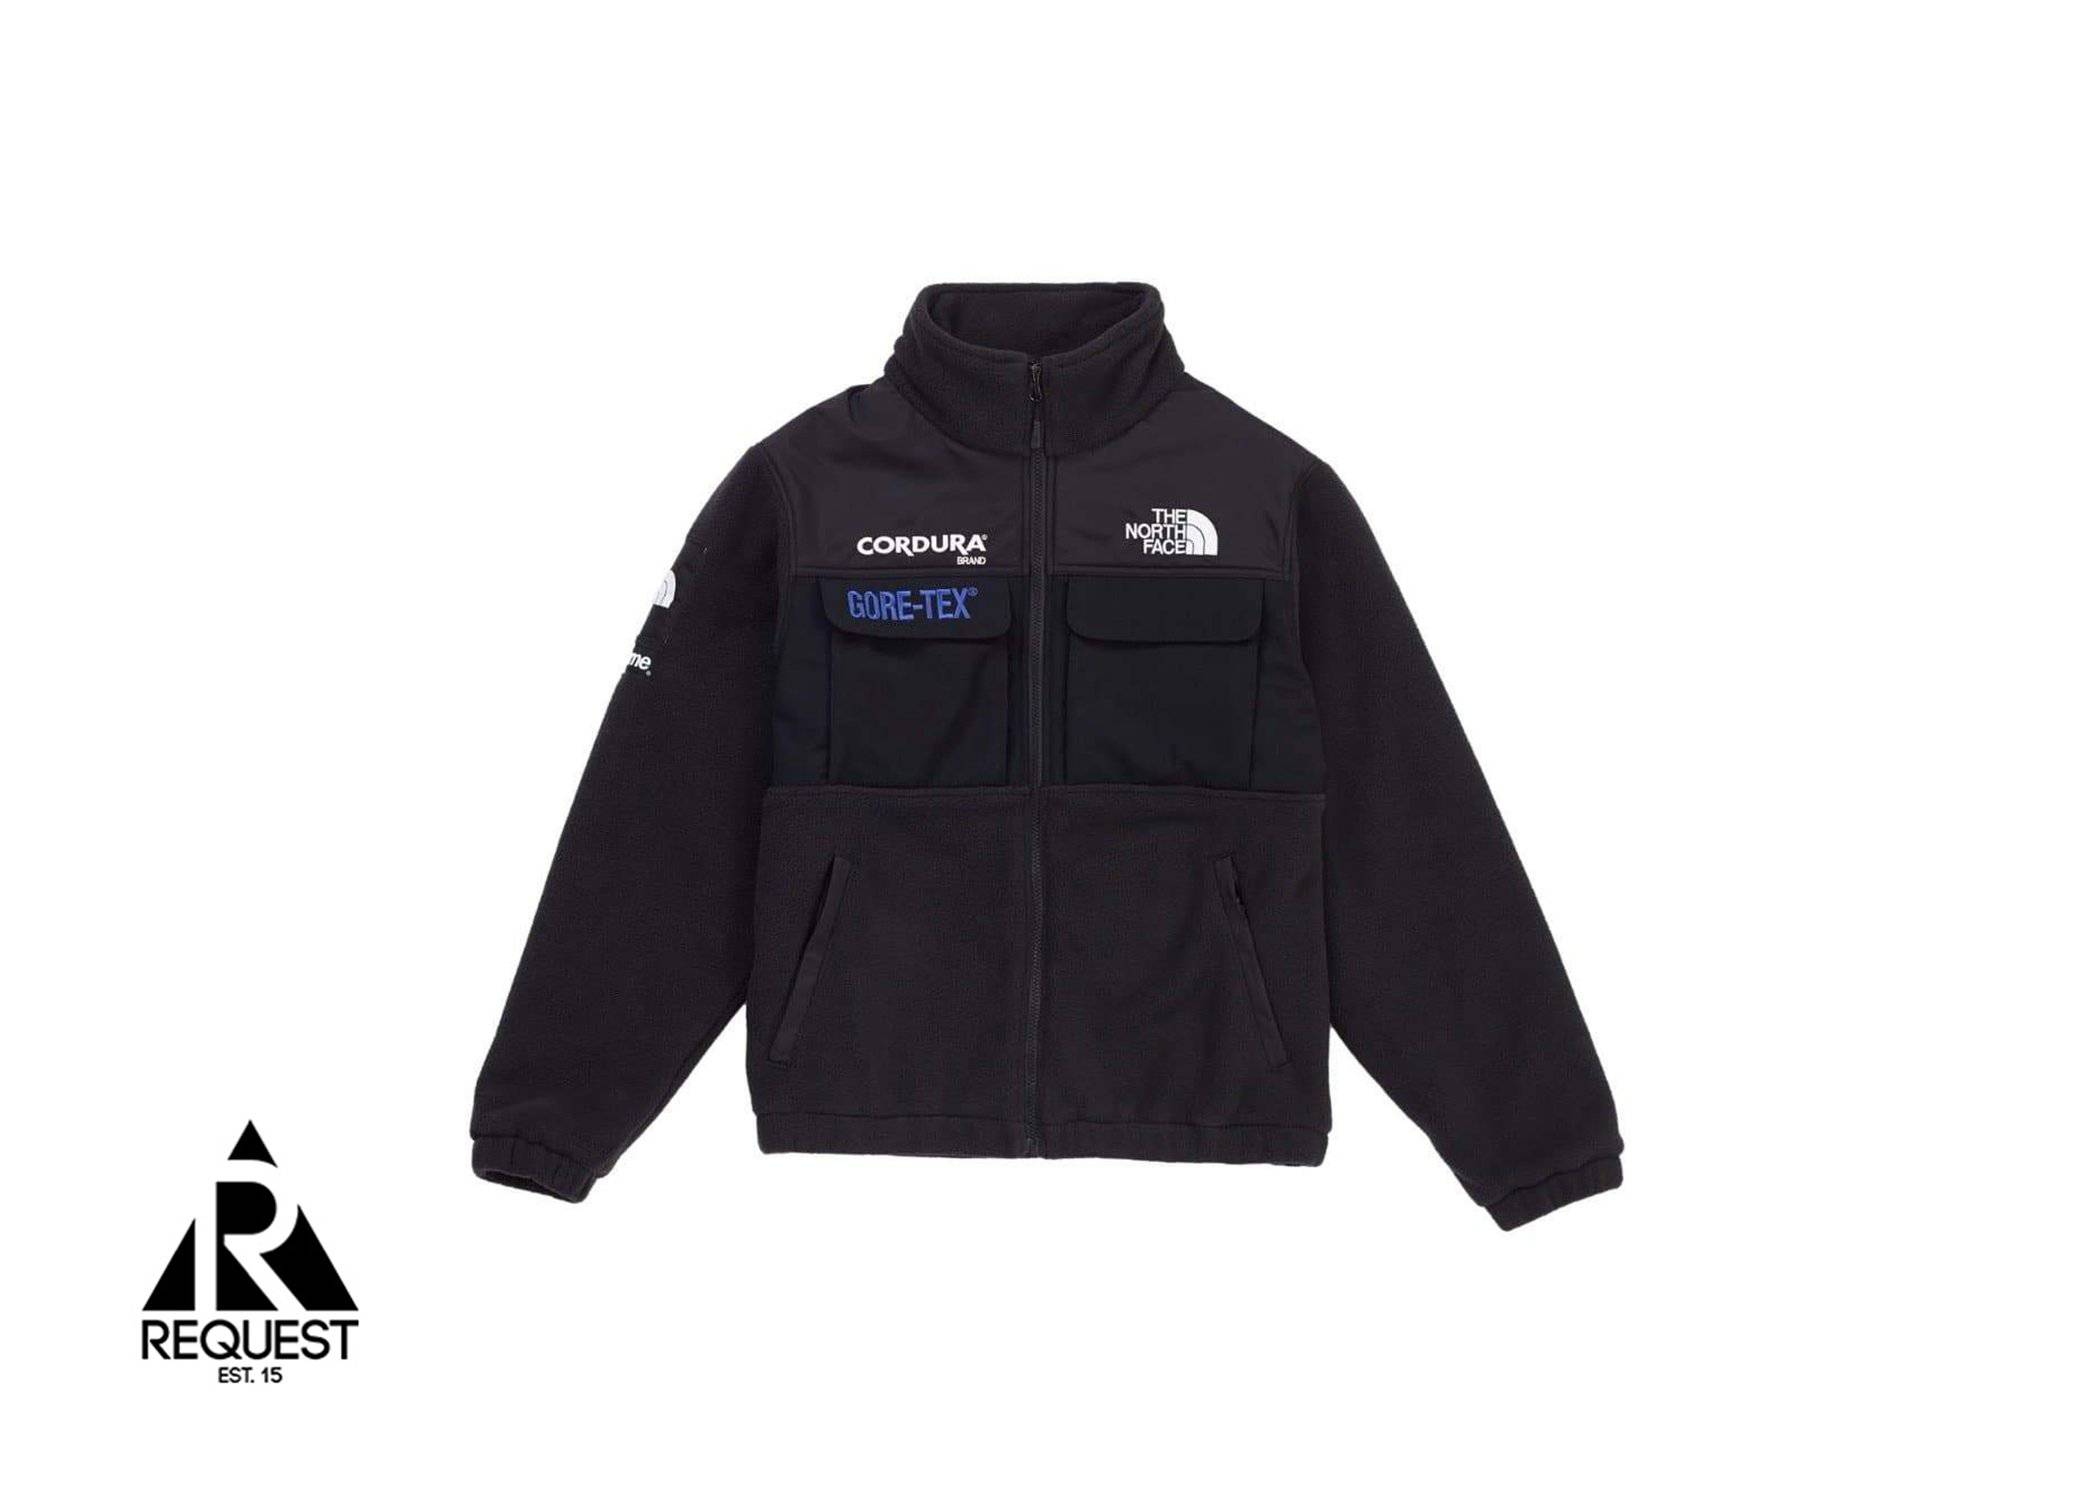 Supreme x The North Face Expedition Fleece “Black”